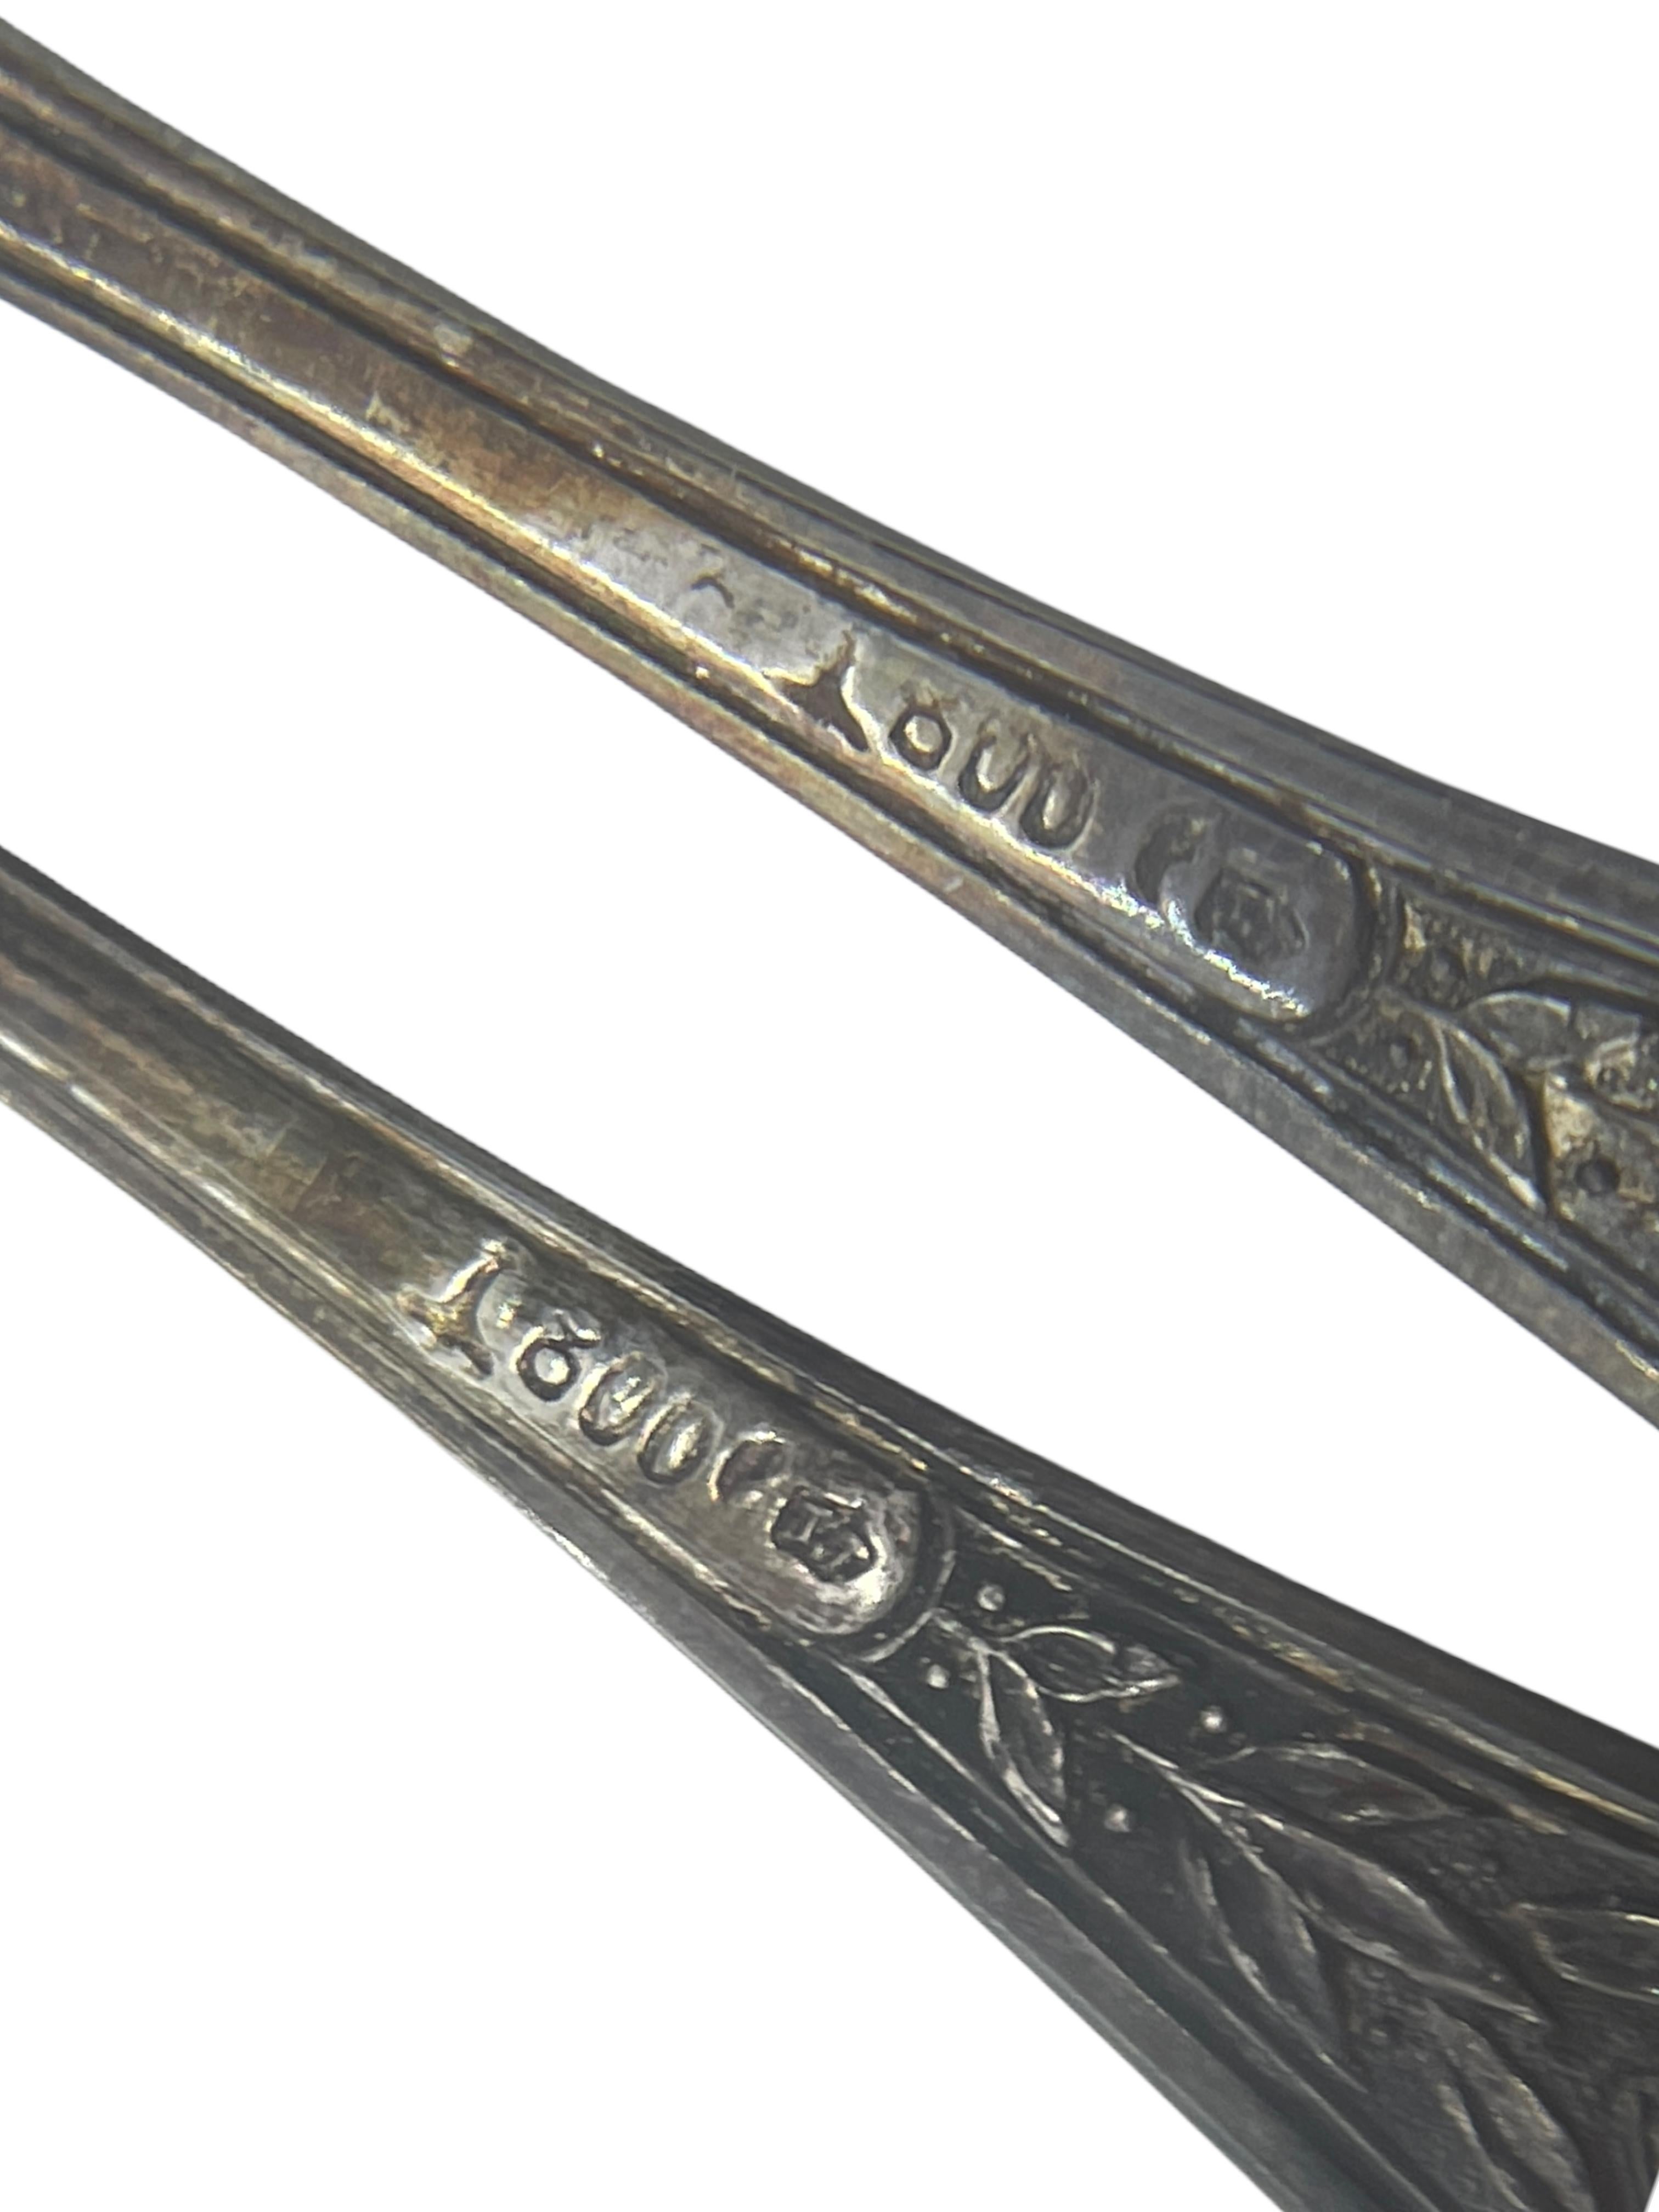 Two Fruit Forks and Sugar Tongs in Case, Antique Germany, c. 1900 Silver 800 For Sale 1